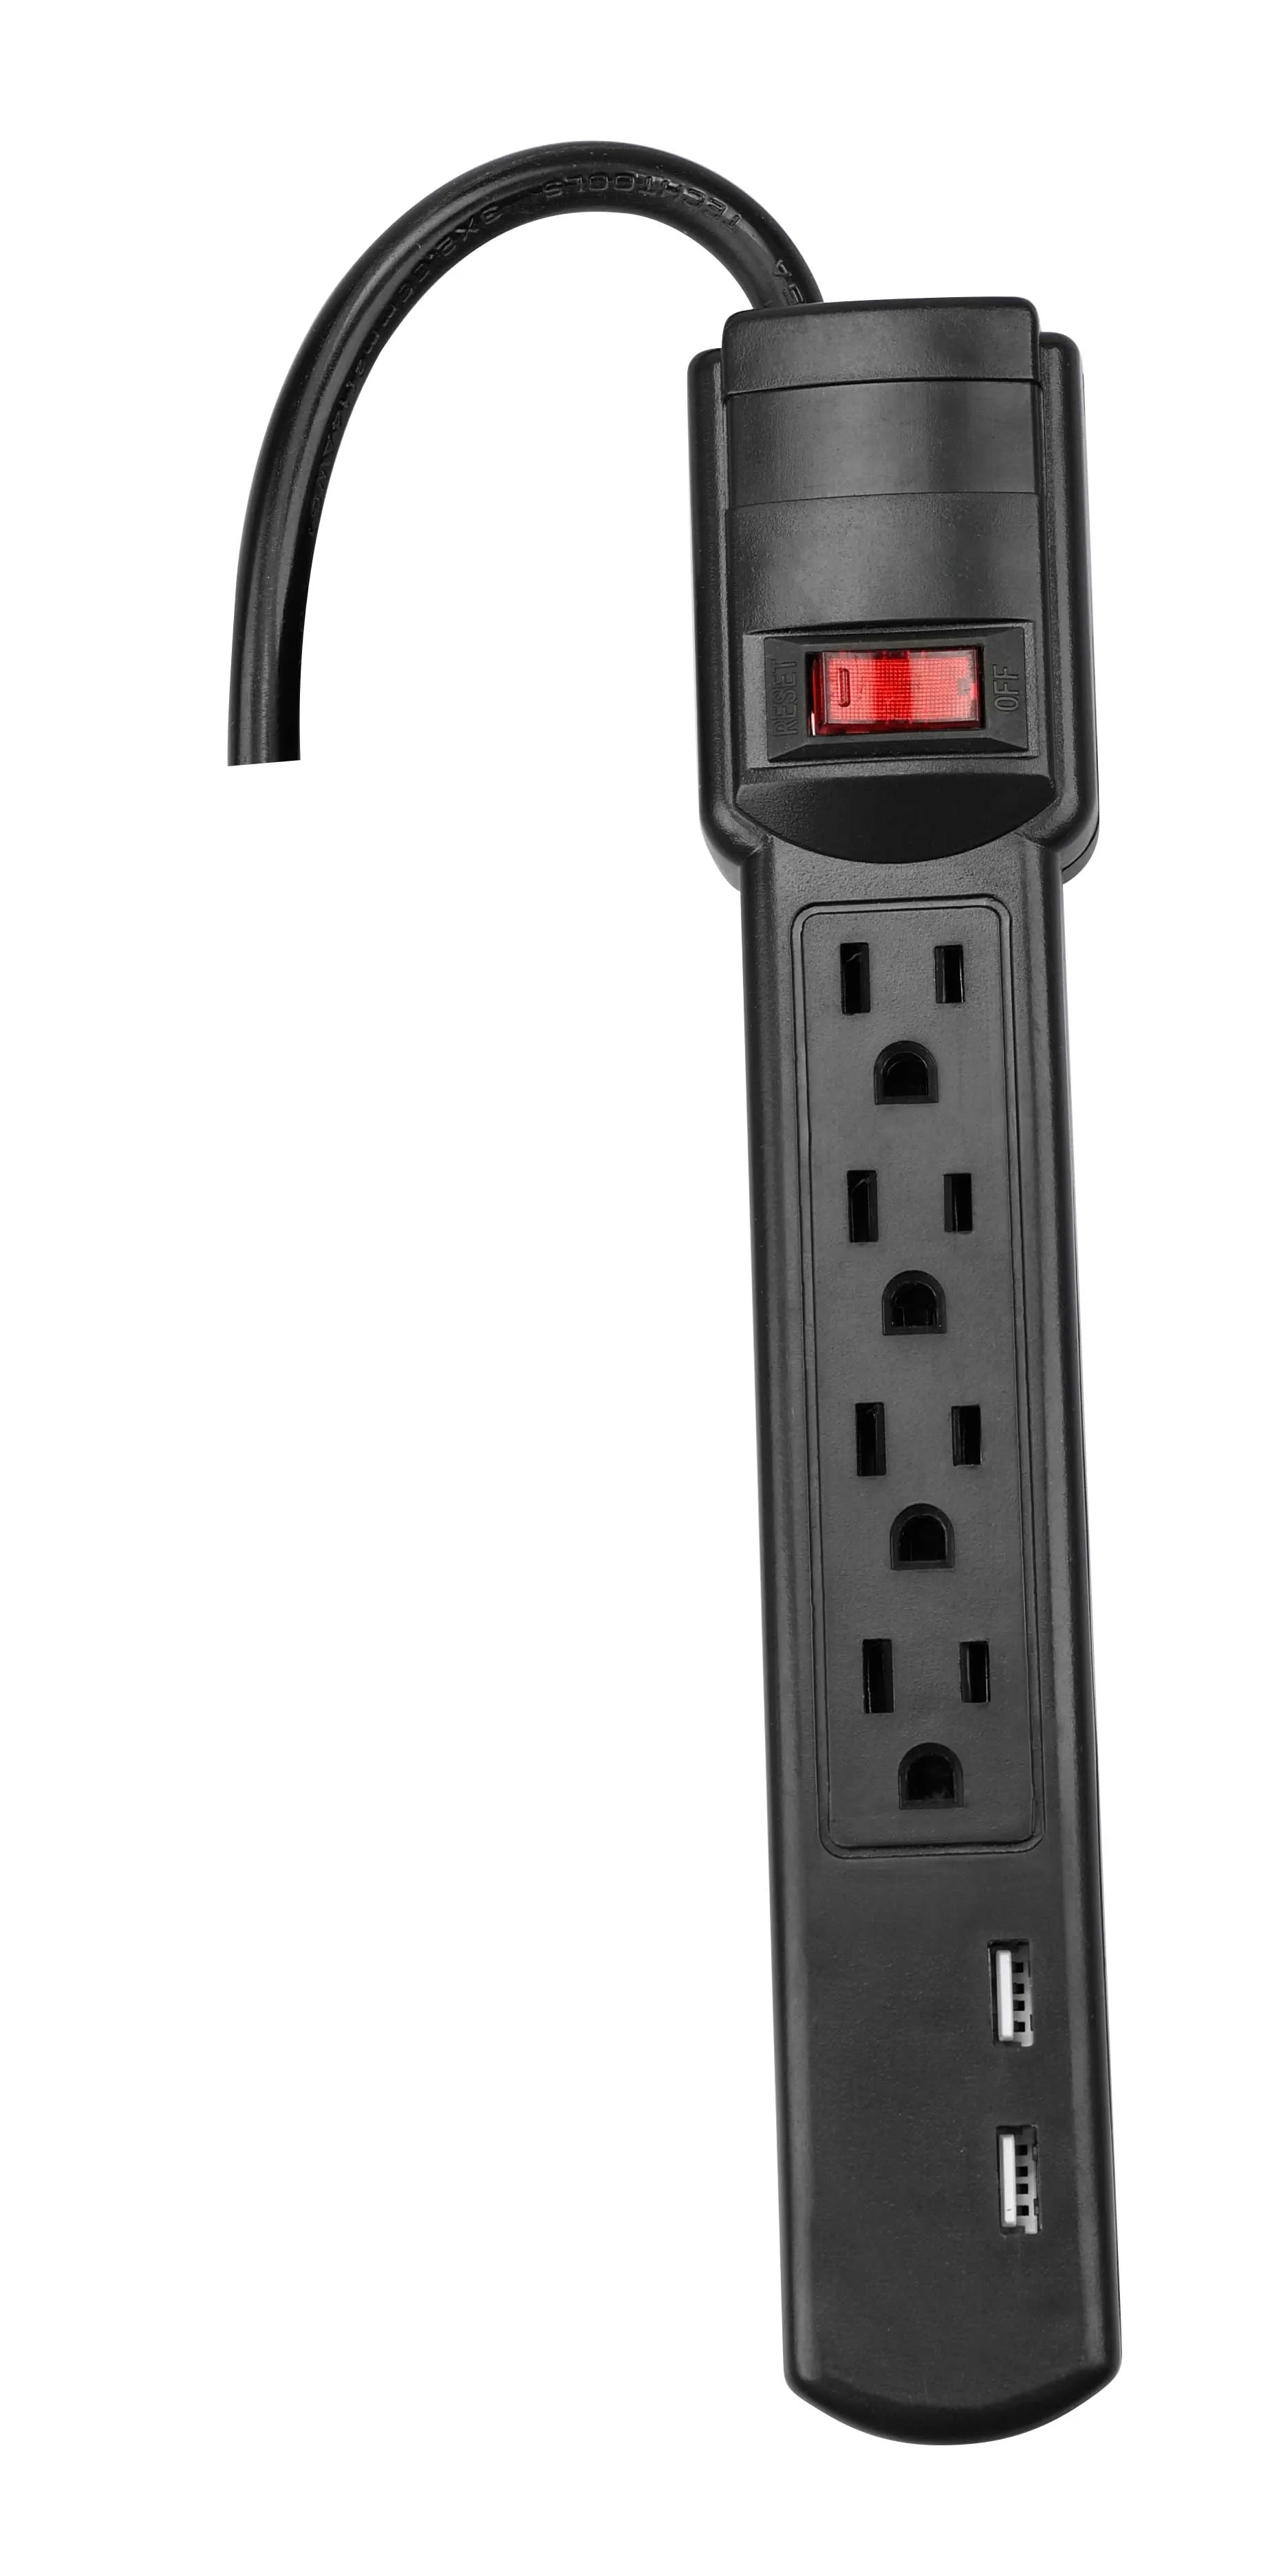 H10424 Power Strip Surge Protector 4 Widely Spaced Outlets with 2 USB Charging Ports and Customized Extension Cord 15A 1875W